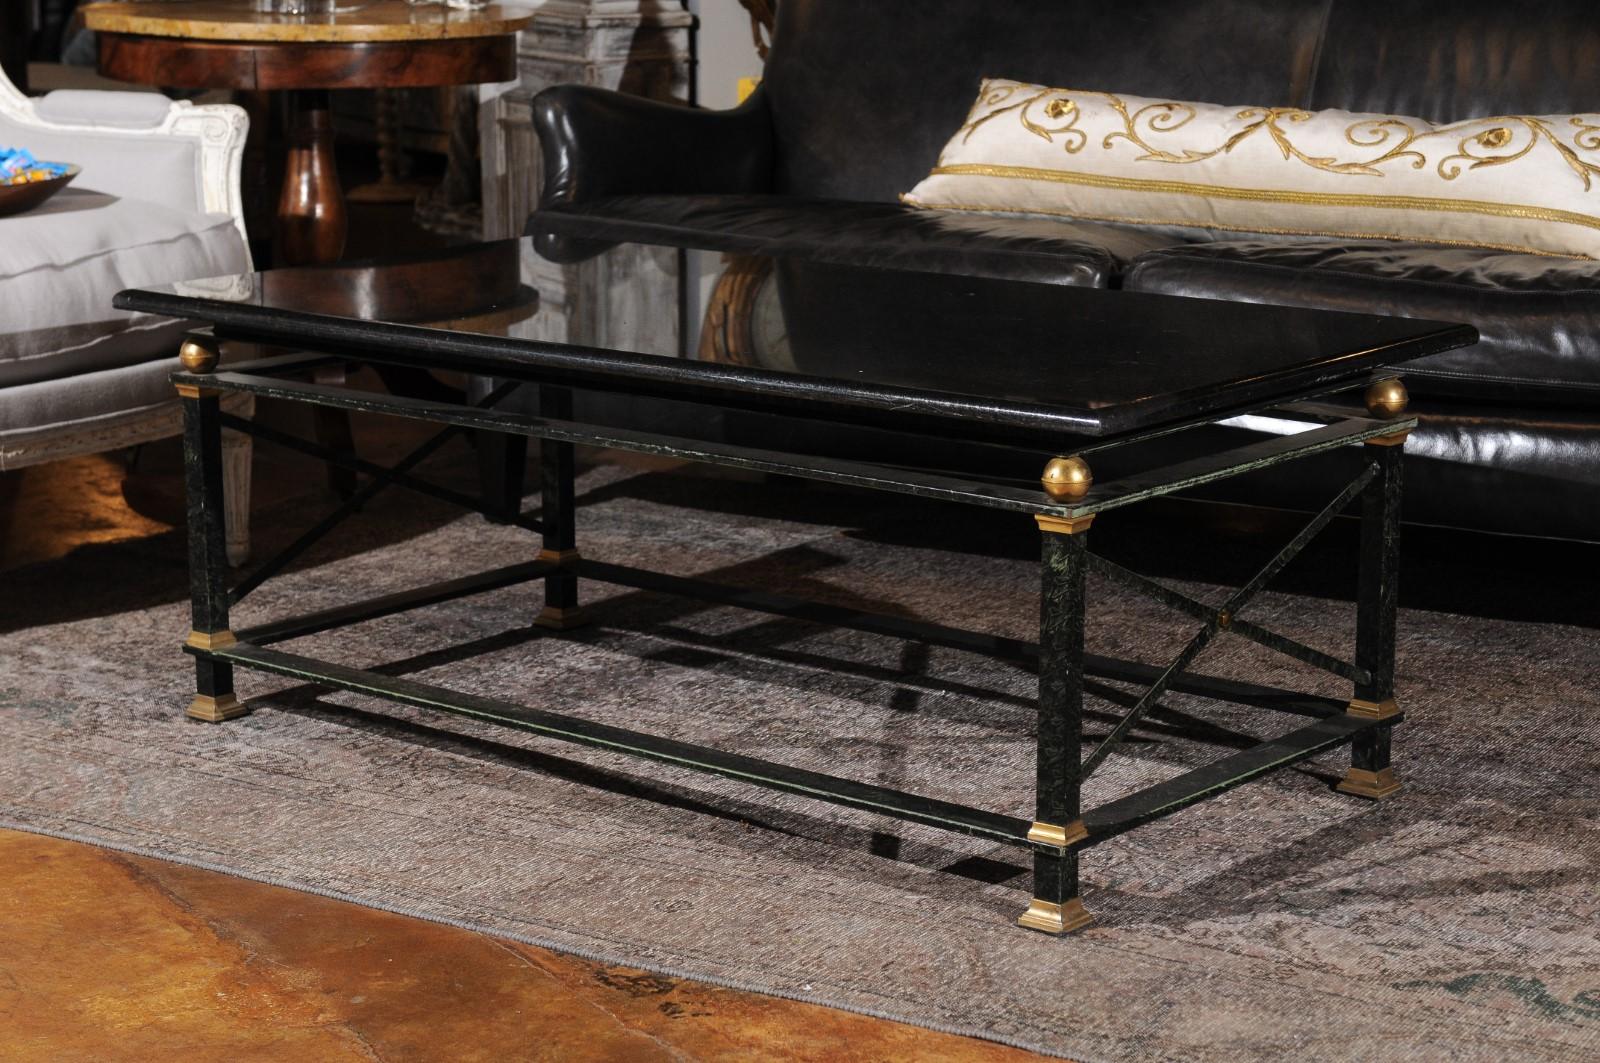 A French Parisian coffee table with black marble top and brass accents. This stylish French coffee table features a rectangular black marble top sitting above a linear iron base presenting a dark green undercoat. The straight legs, connected to one